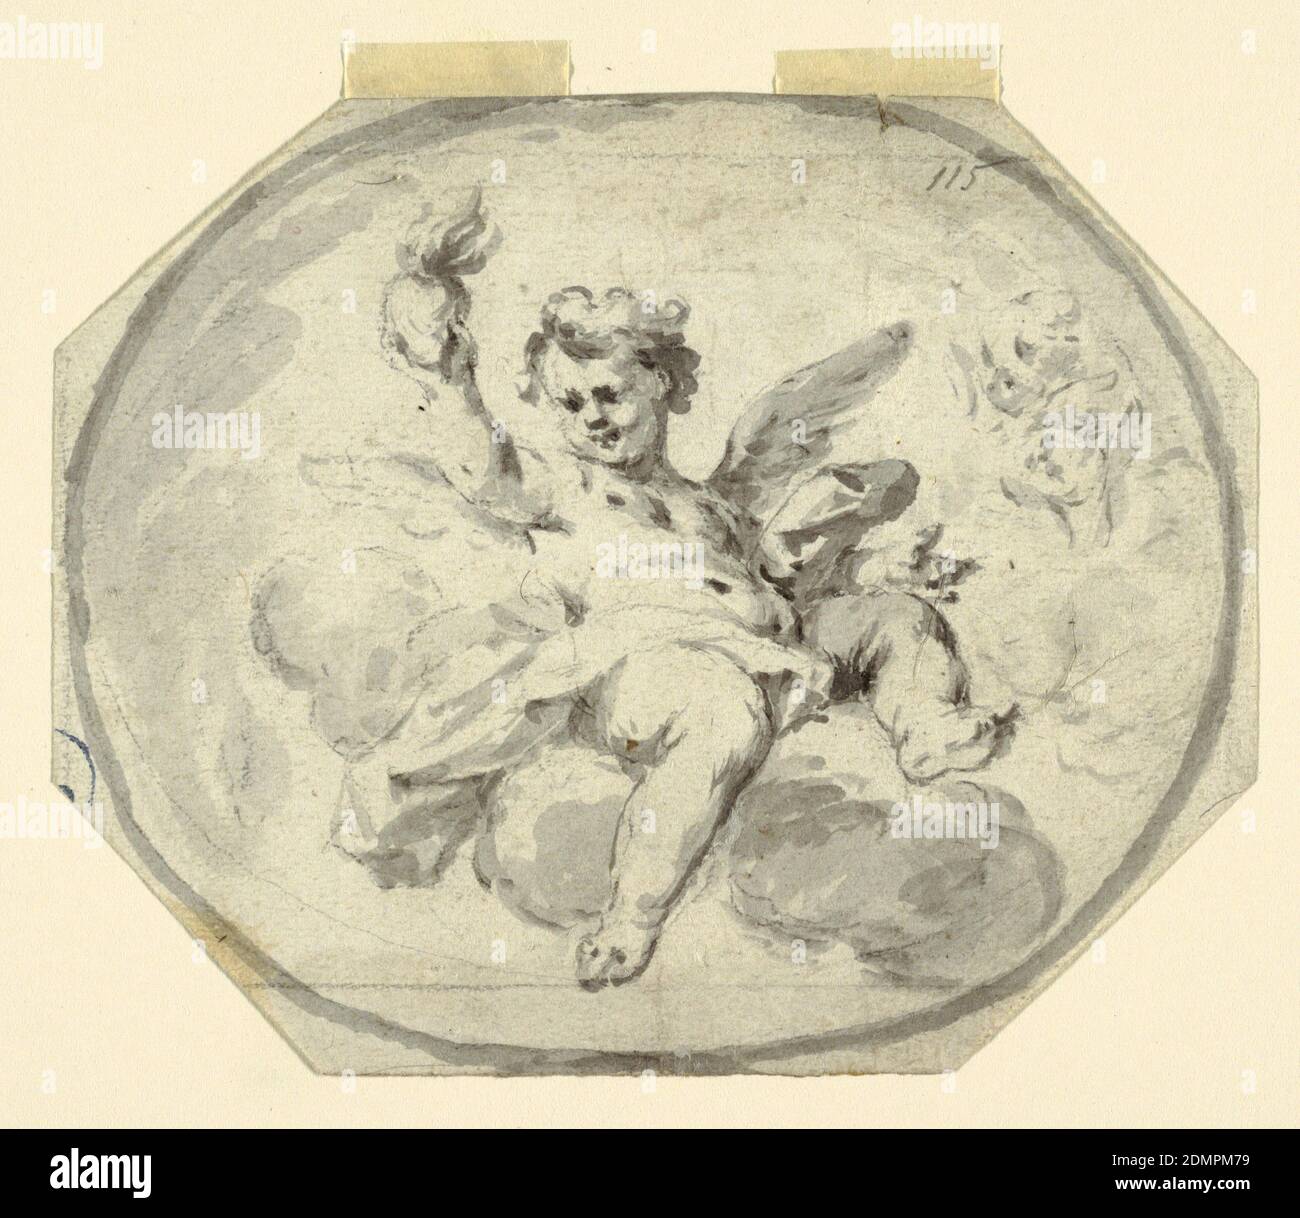 Design for a Painted Ceiling, Francesco Saverio Mergolo, Italian, 1746–1786, Brush and black wash, black chalk on paper, Octagonal. A cupid sits upon clouds, raising with his right hand a burning heart. At right are two heads of cupis. Framed as a horzontal ovoid. Squared. On verso are accountings, Italy, 1770–1800, figures, Drawing Stock Photo